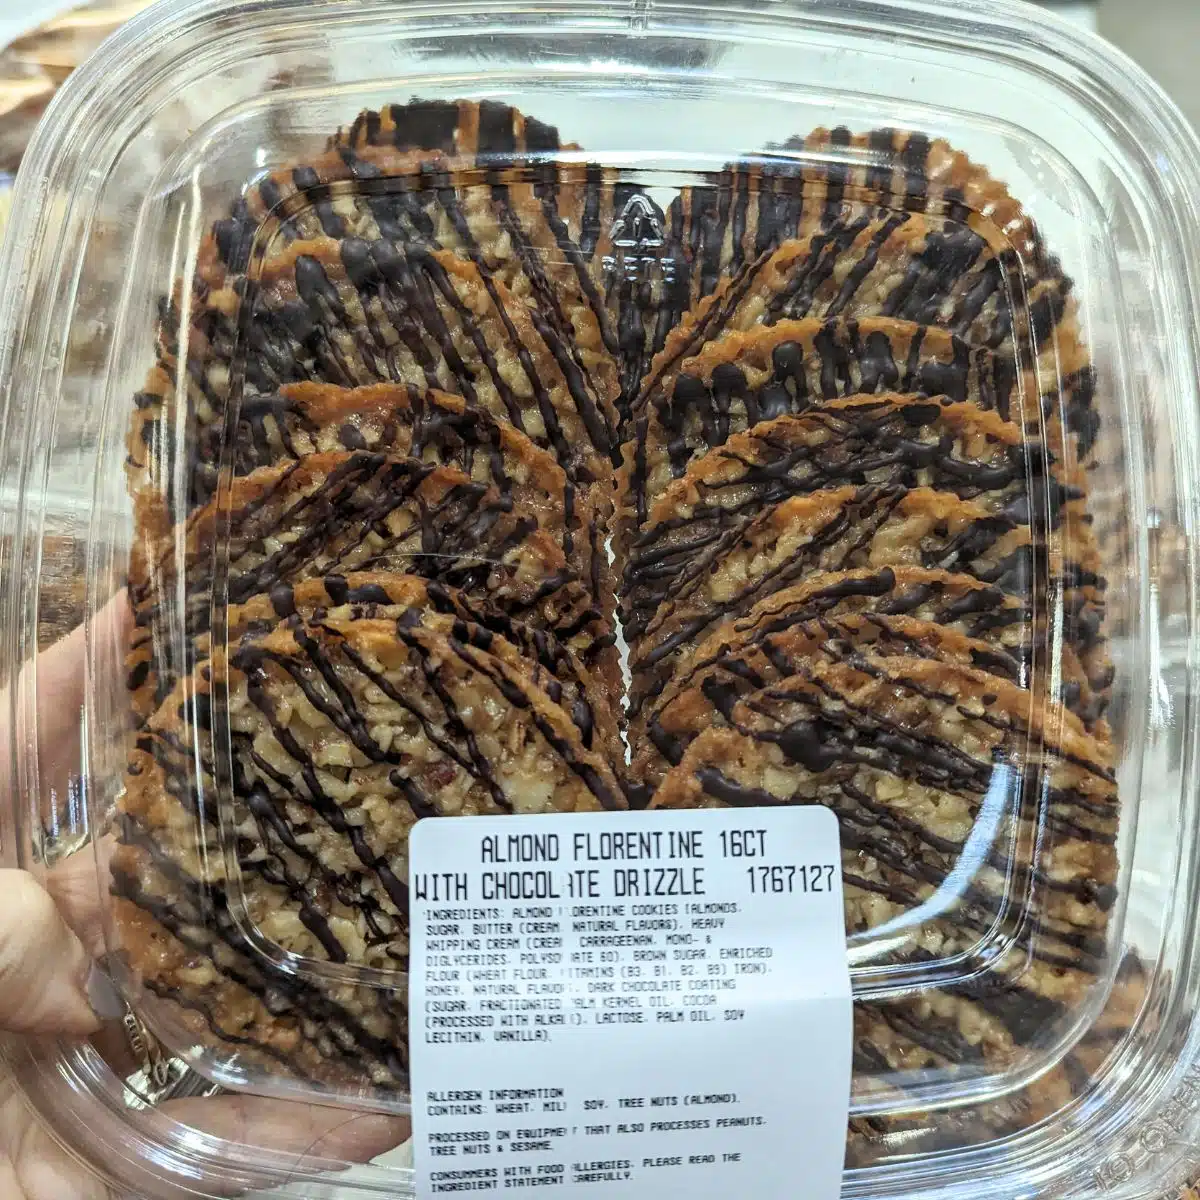 Costco's Almond Florentines with Chocolate Drizzle.